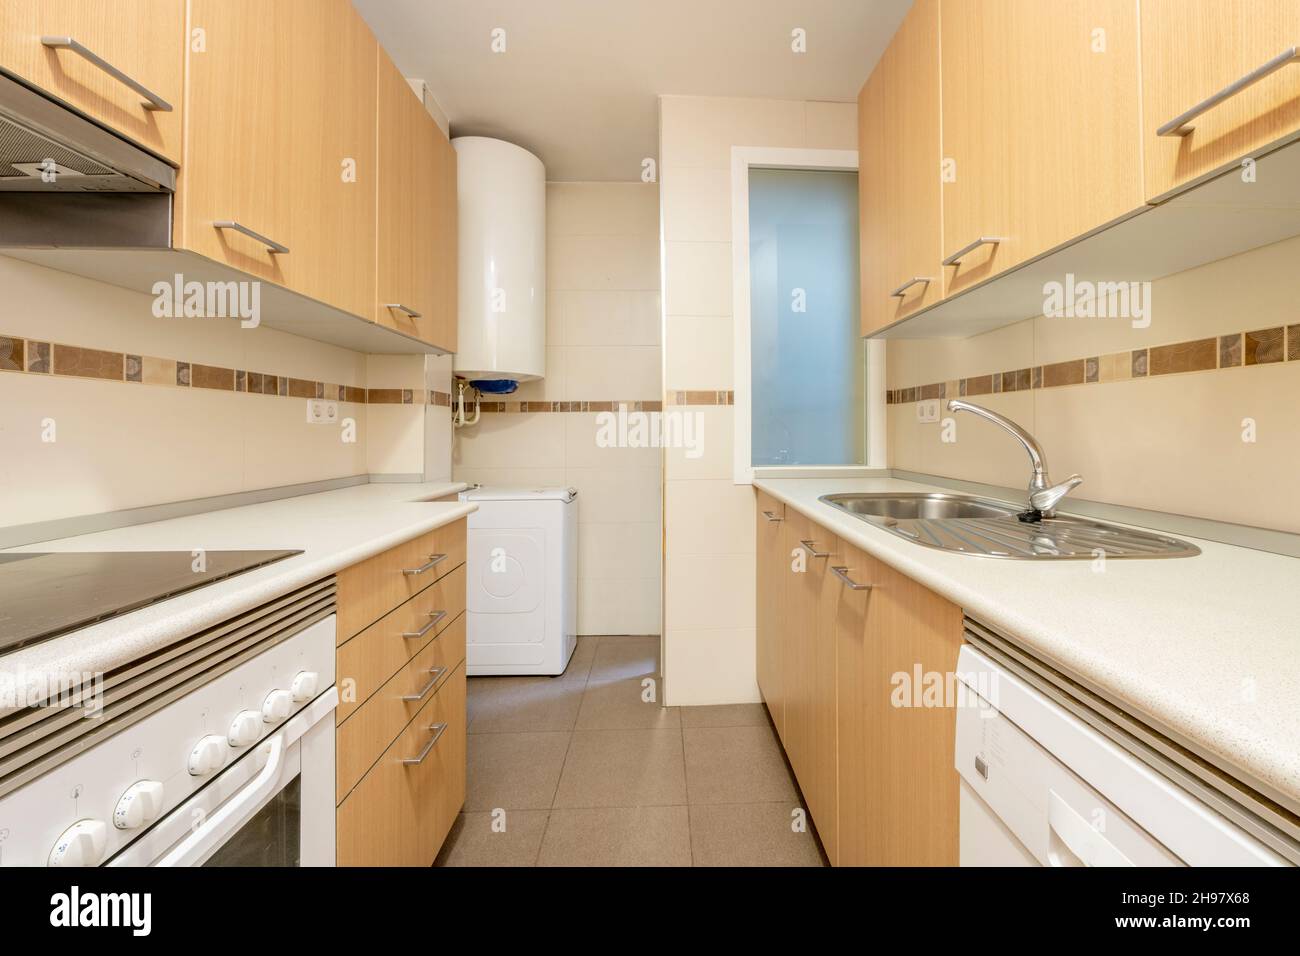 Closeup of classic cream-colored kitchen with appliances Stock Photo by  staRRush